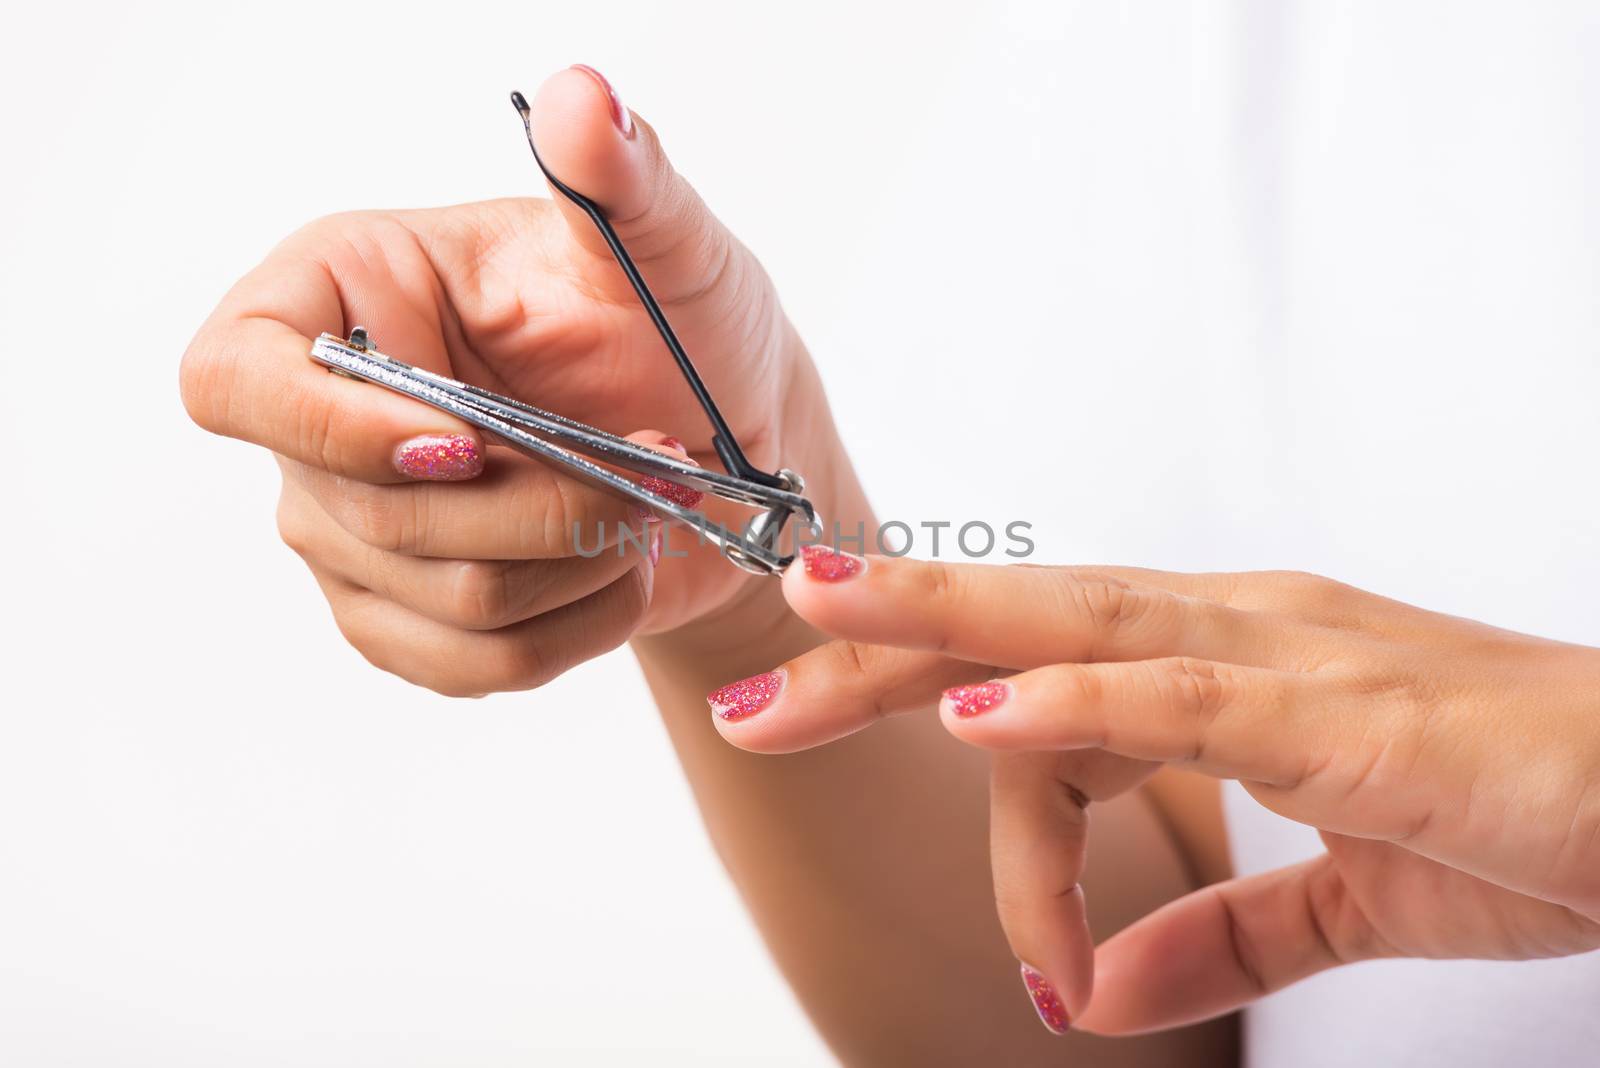 Woman cutting nails on finger using a nail clipper by Sorapop